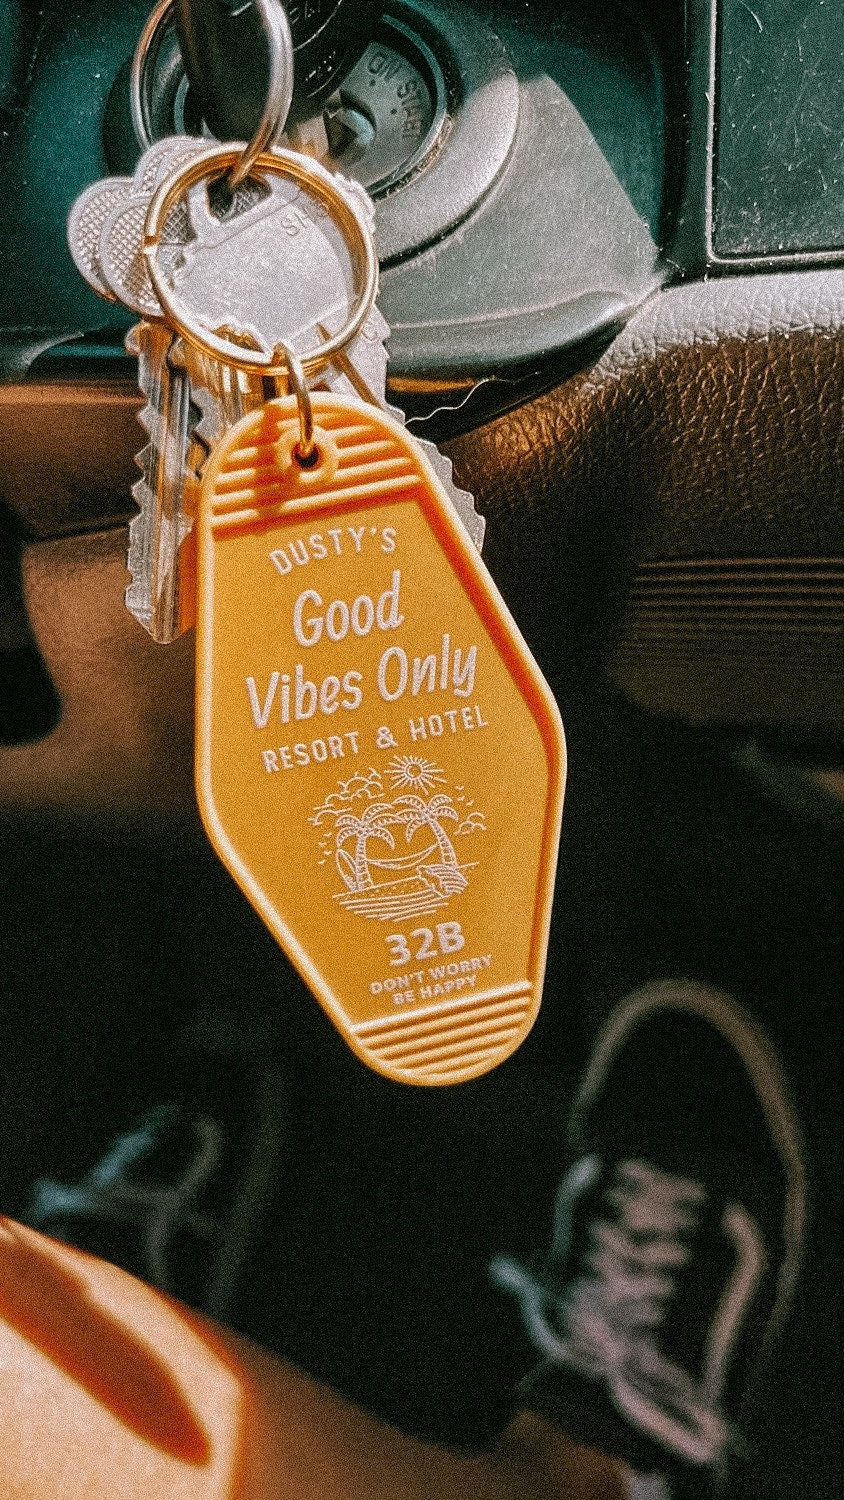 Good Vibes Only Resort & Hotel Keychain